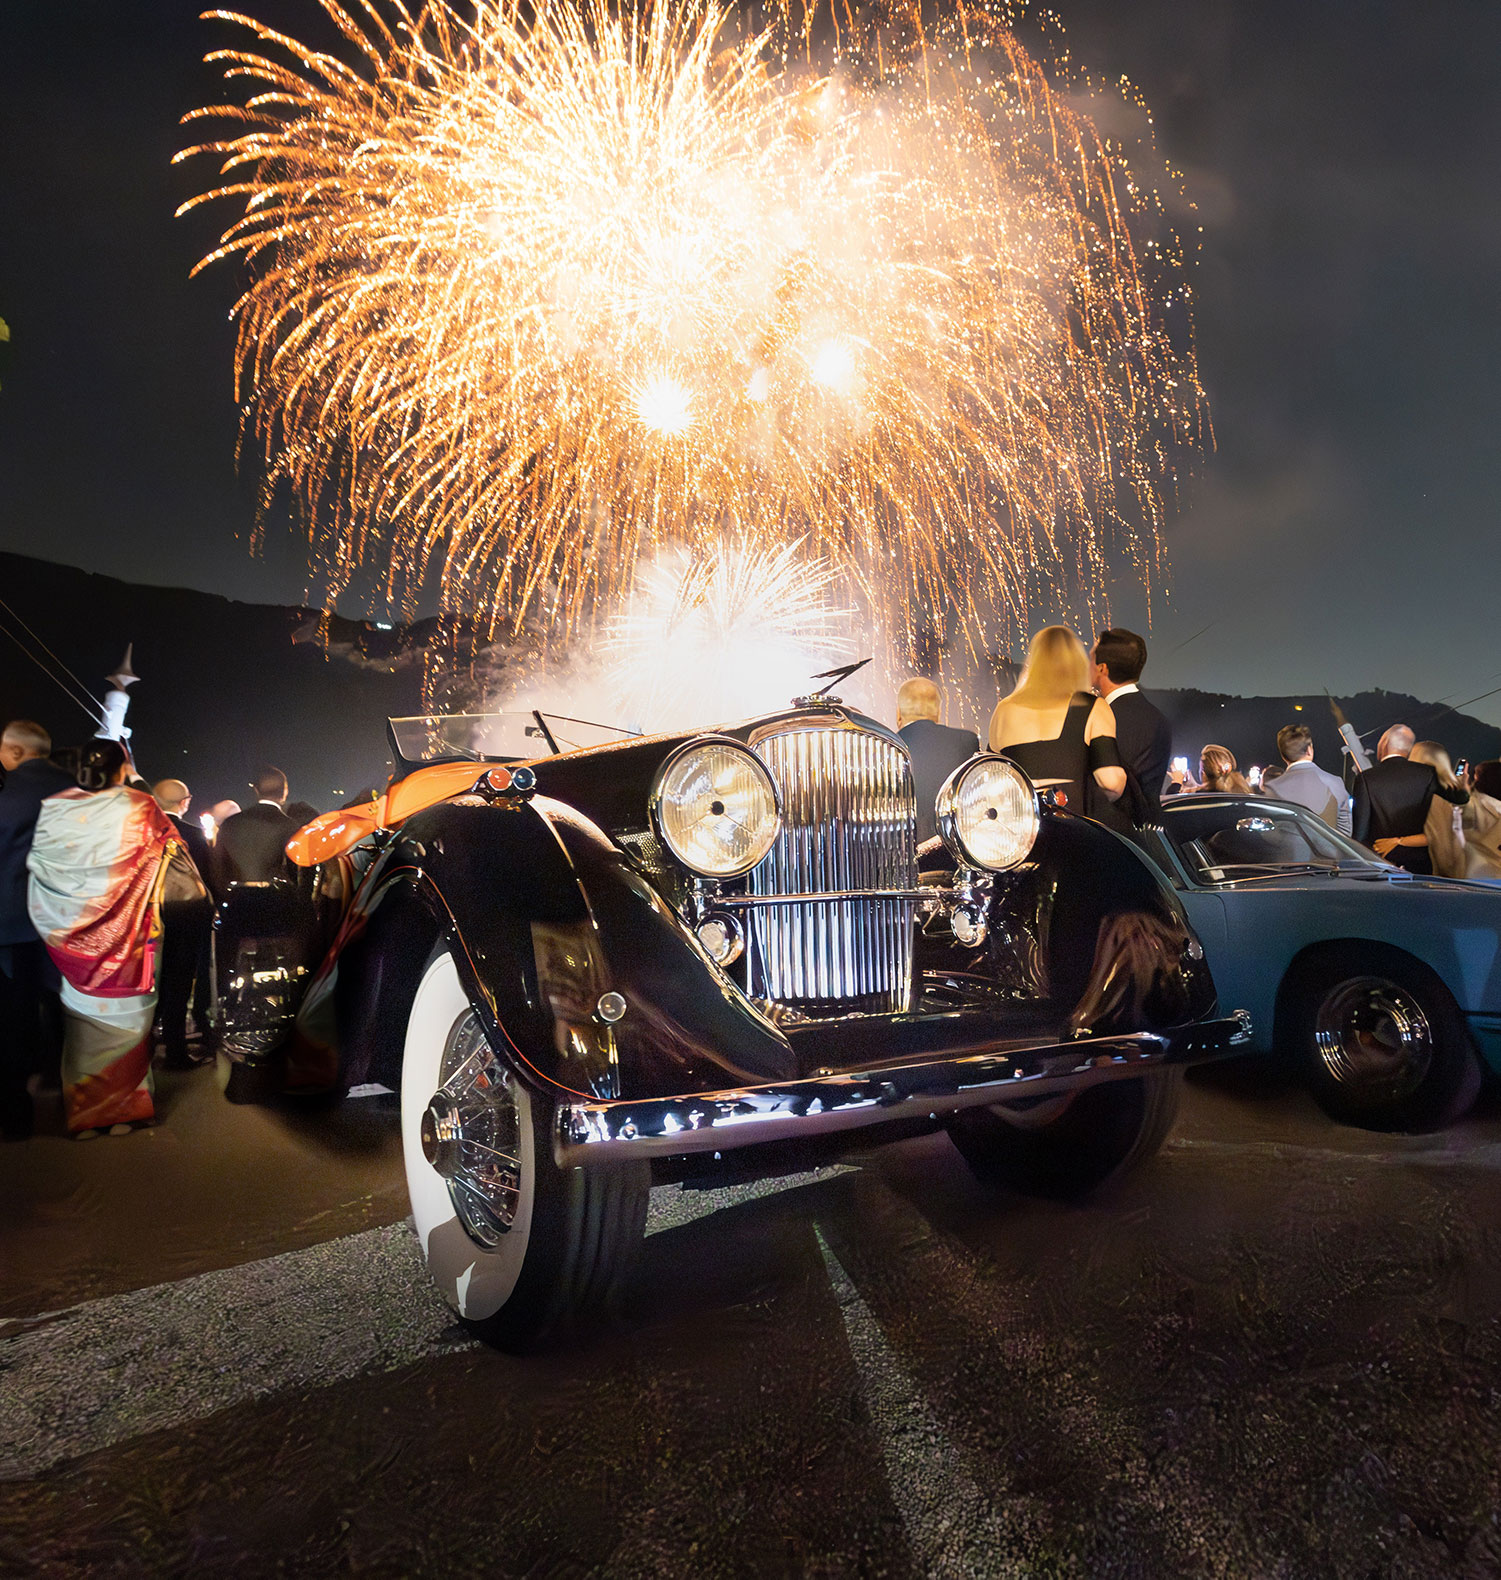 The 1935 Duesenberg SJ Speedster that won best in show at the Villa d'Este concours in 2023, with fireworks going off over Lake Como in the background